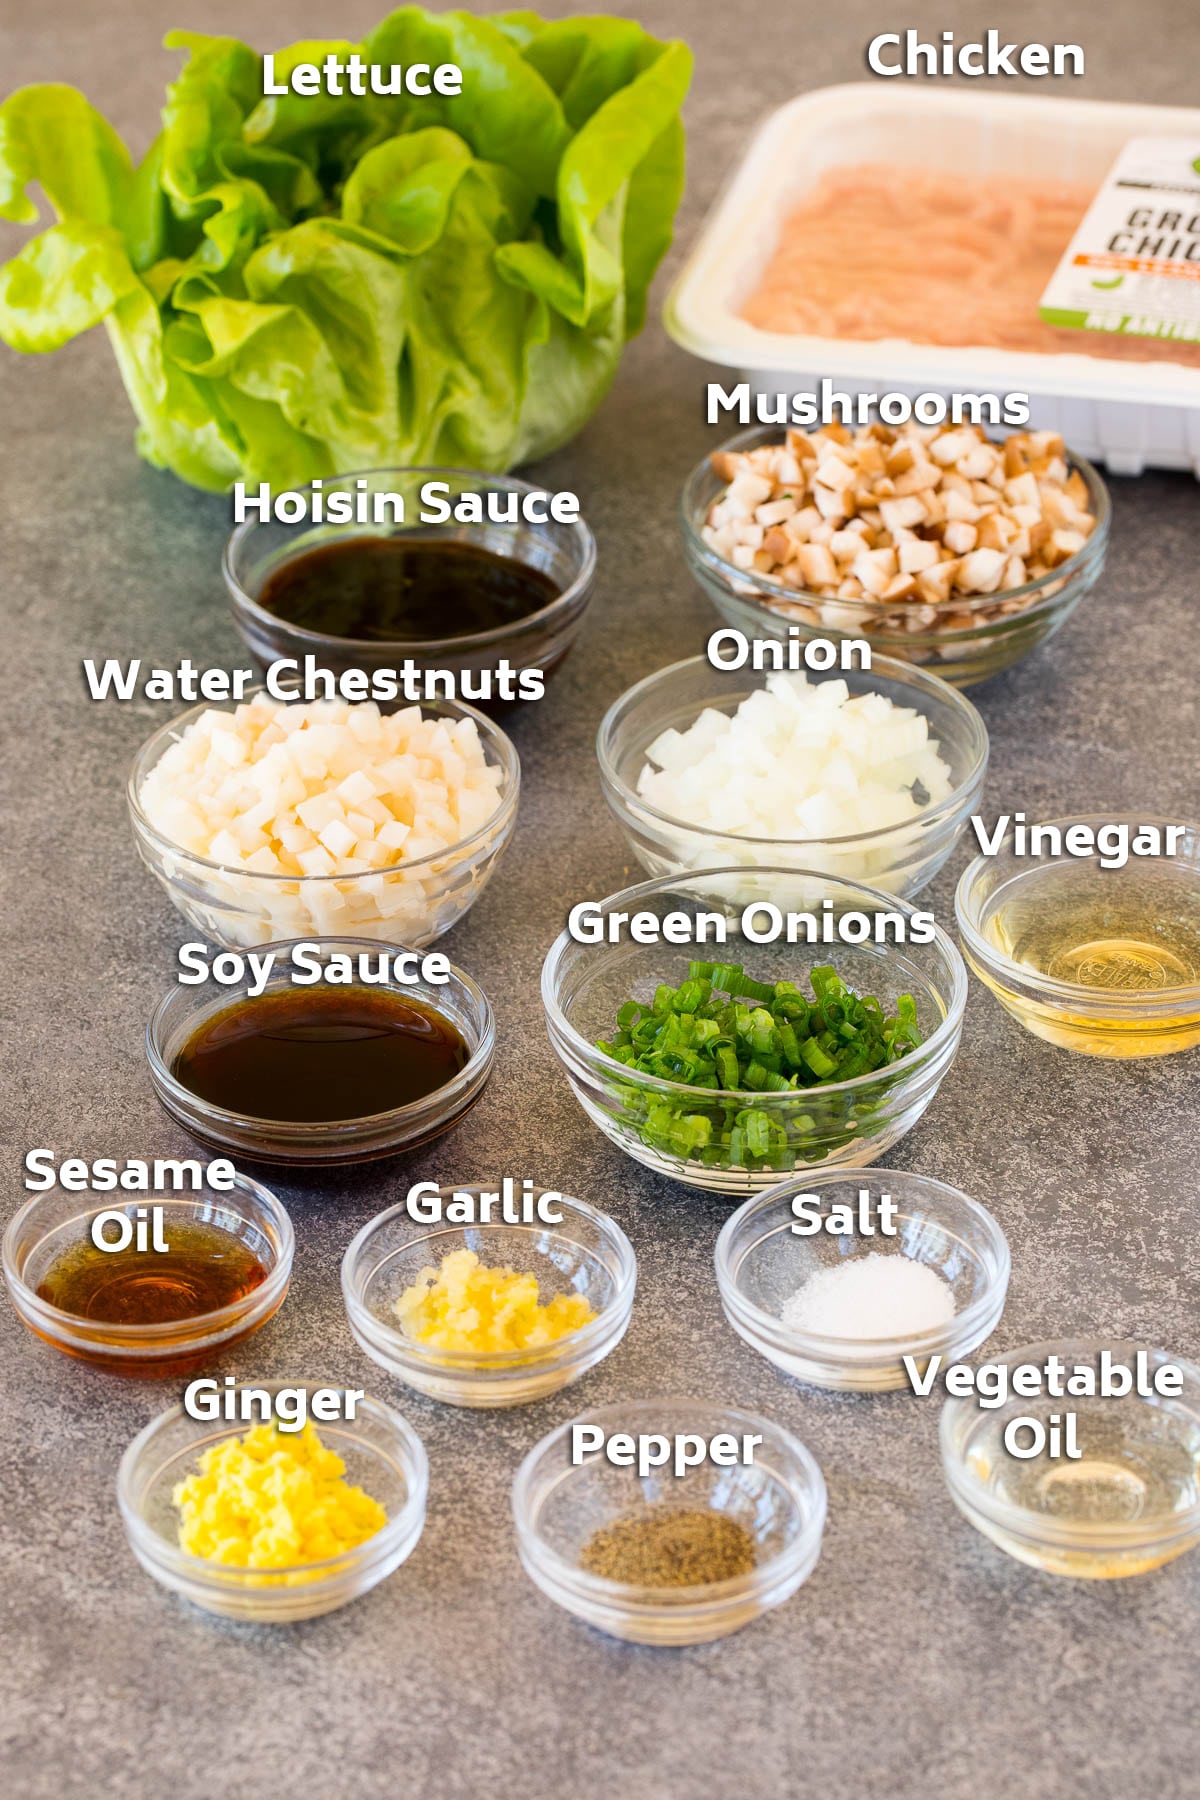 Ingredients including ground chicken, vegetables, seasonings and a head of lettuce.